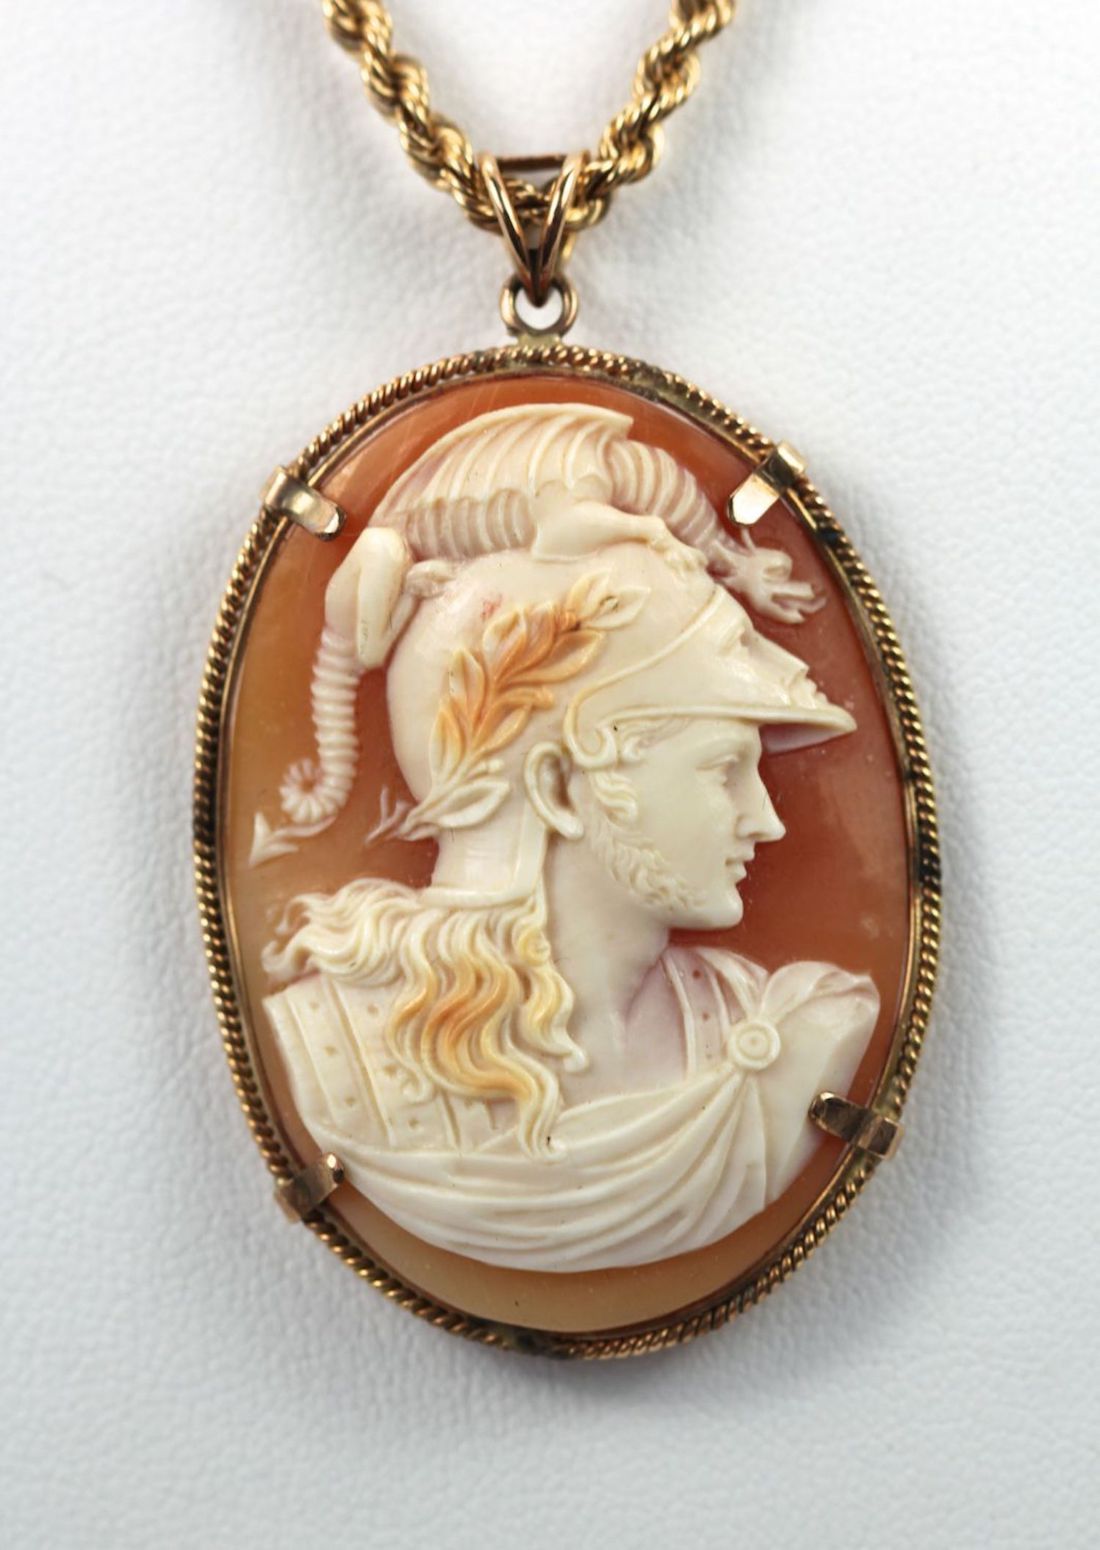 Antique Fine Cameo Pendant Necklace depicting Ares- God of War 14K Yellow Gold #3